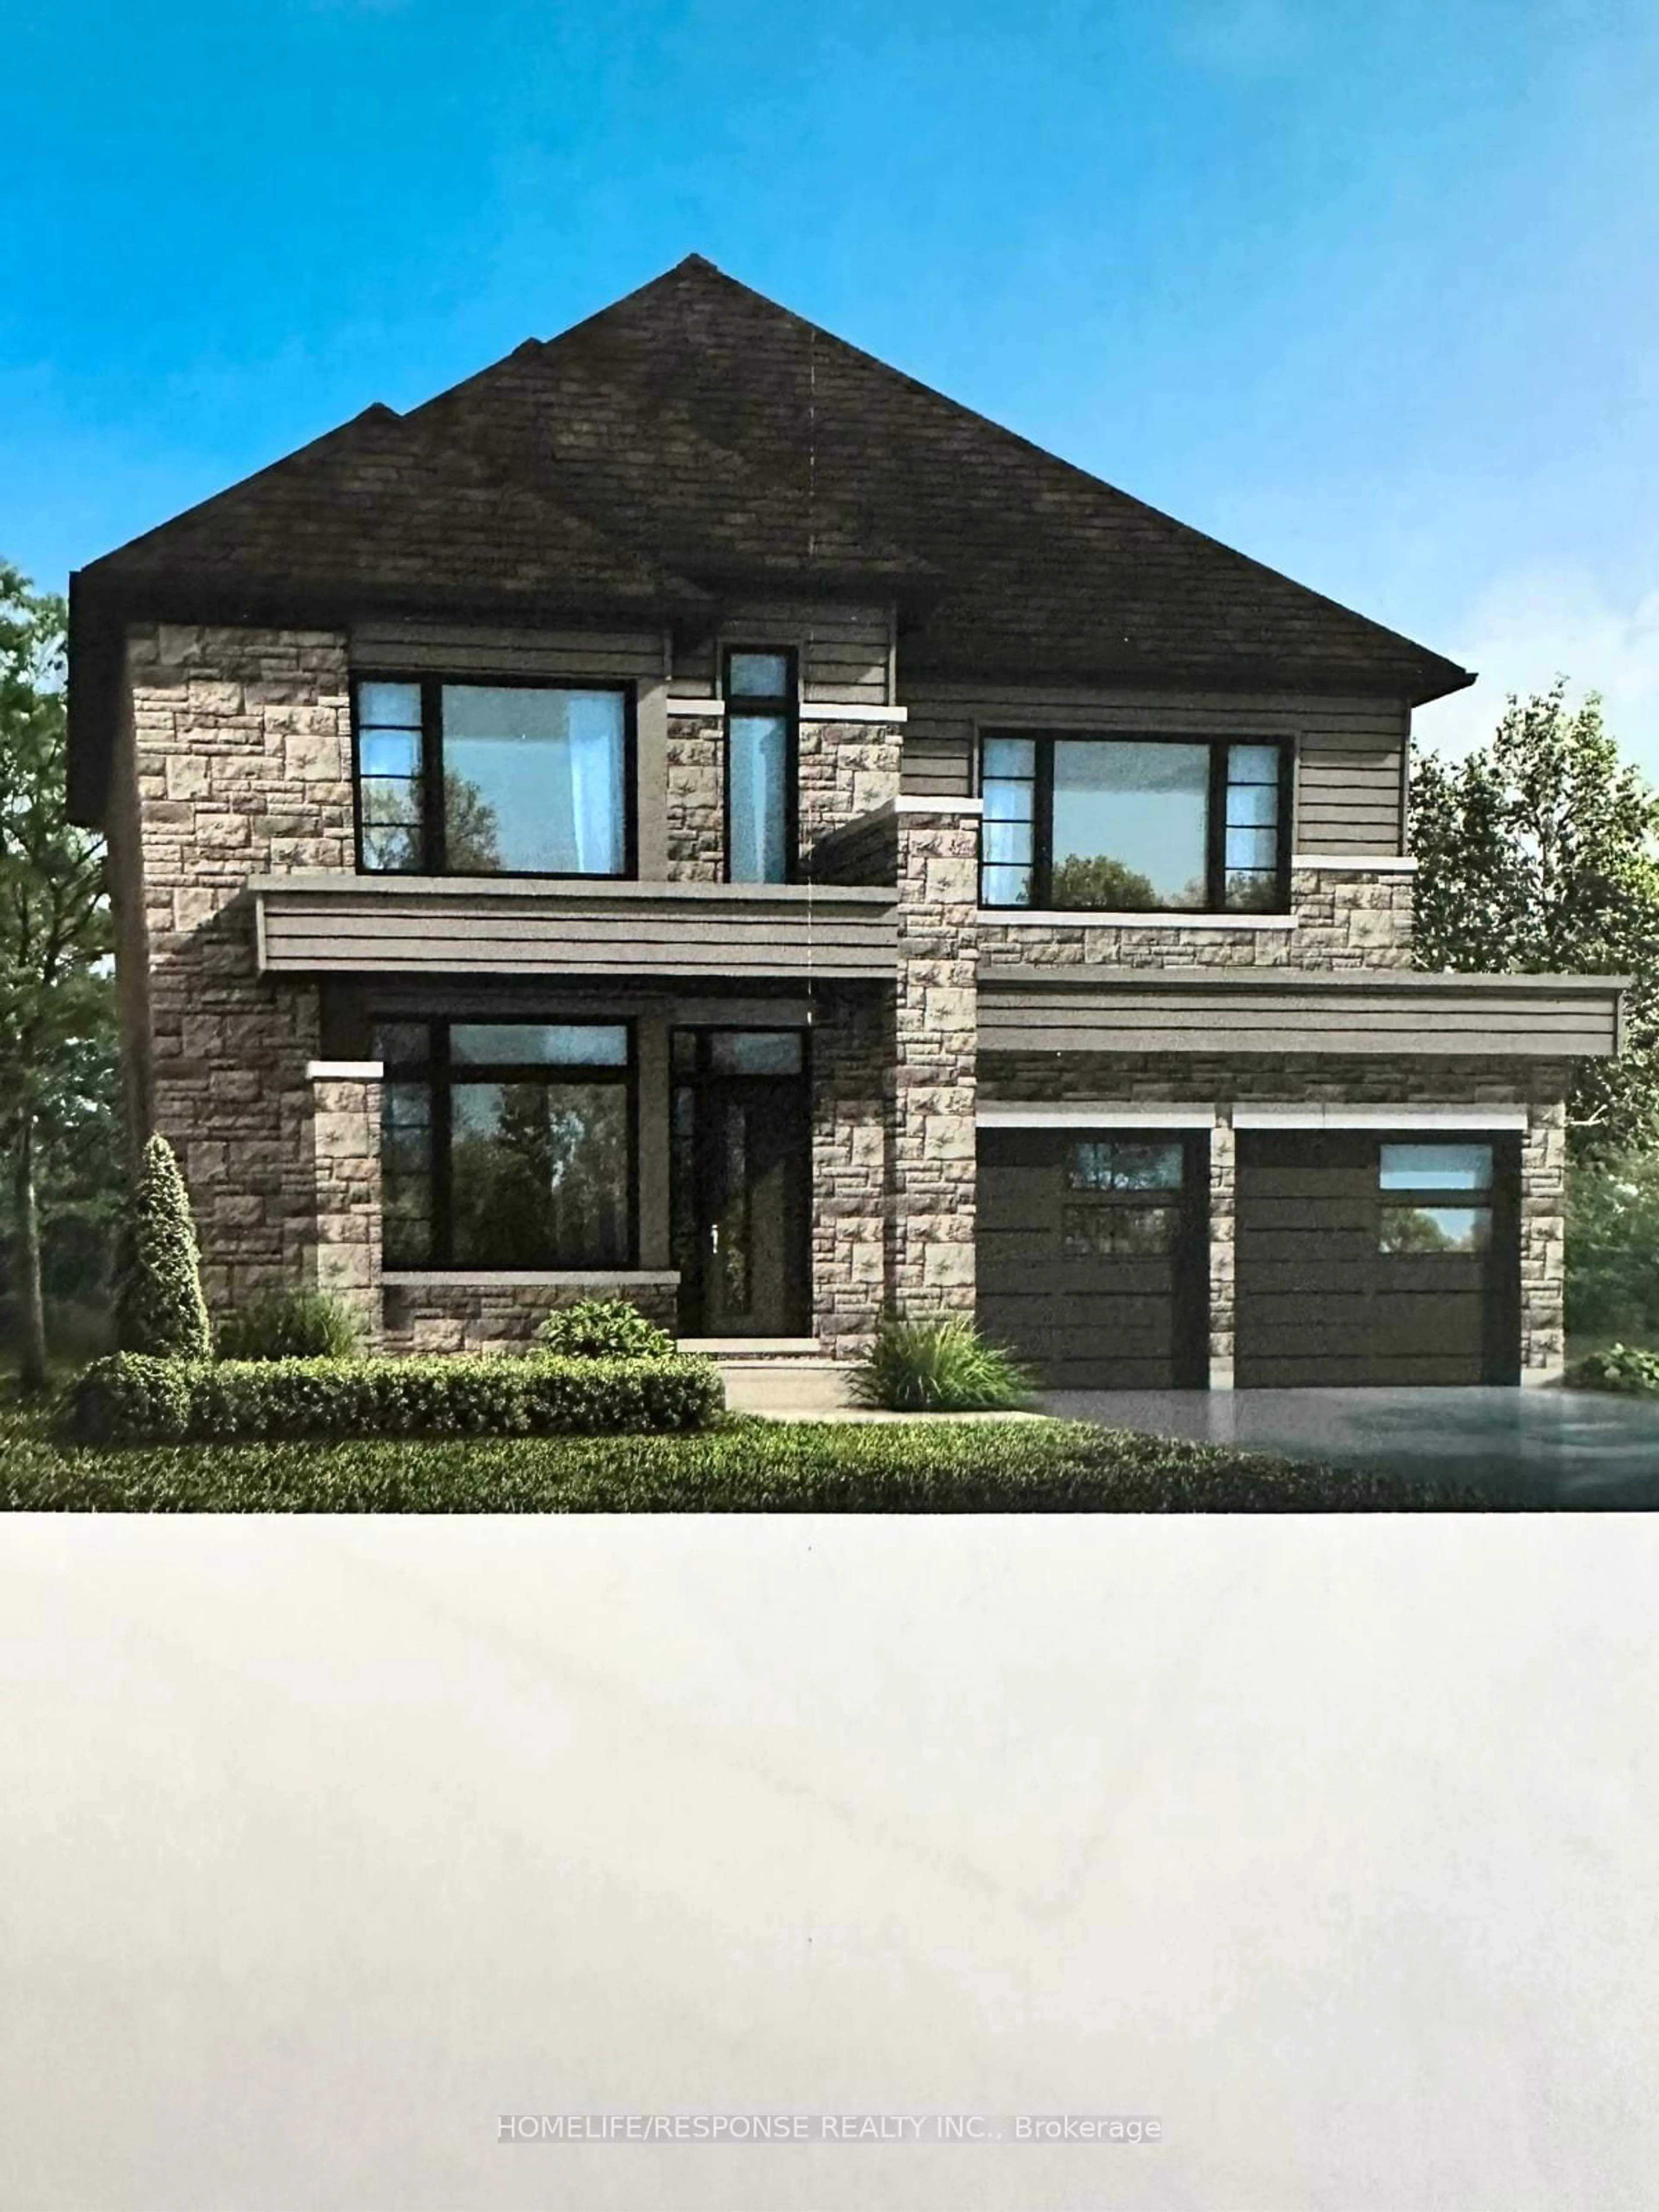 Home with brick exterior material for 714 Daimler Pkwy, Welland Ontario L3B 0H2